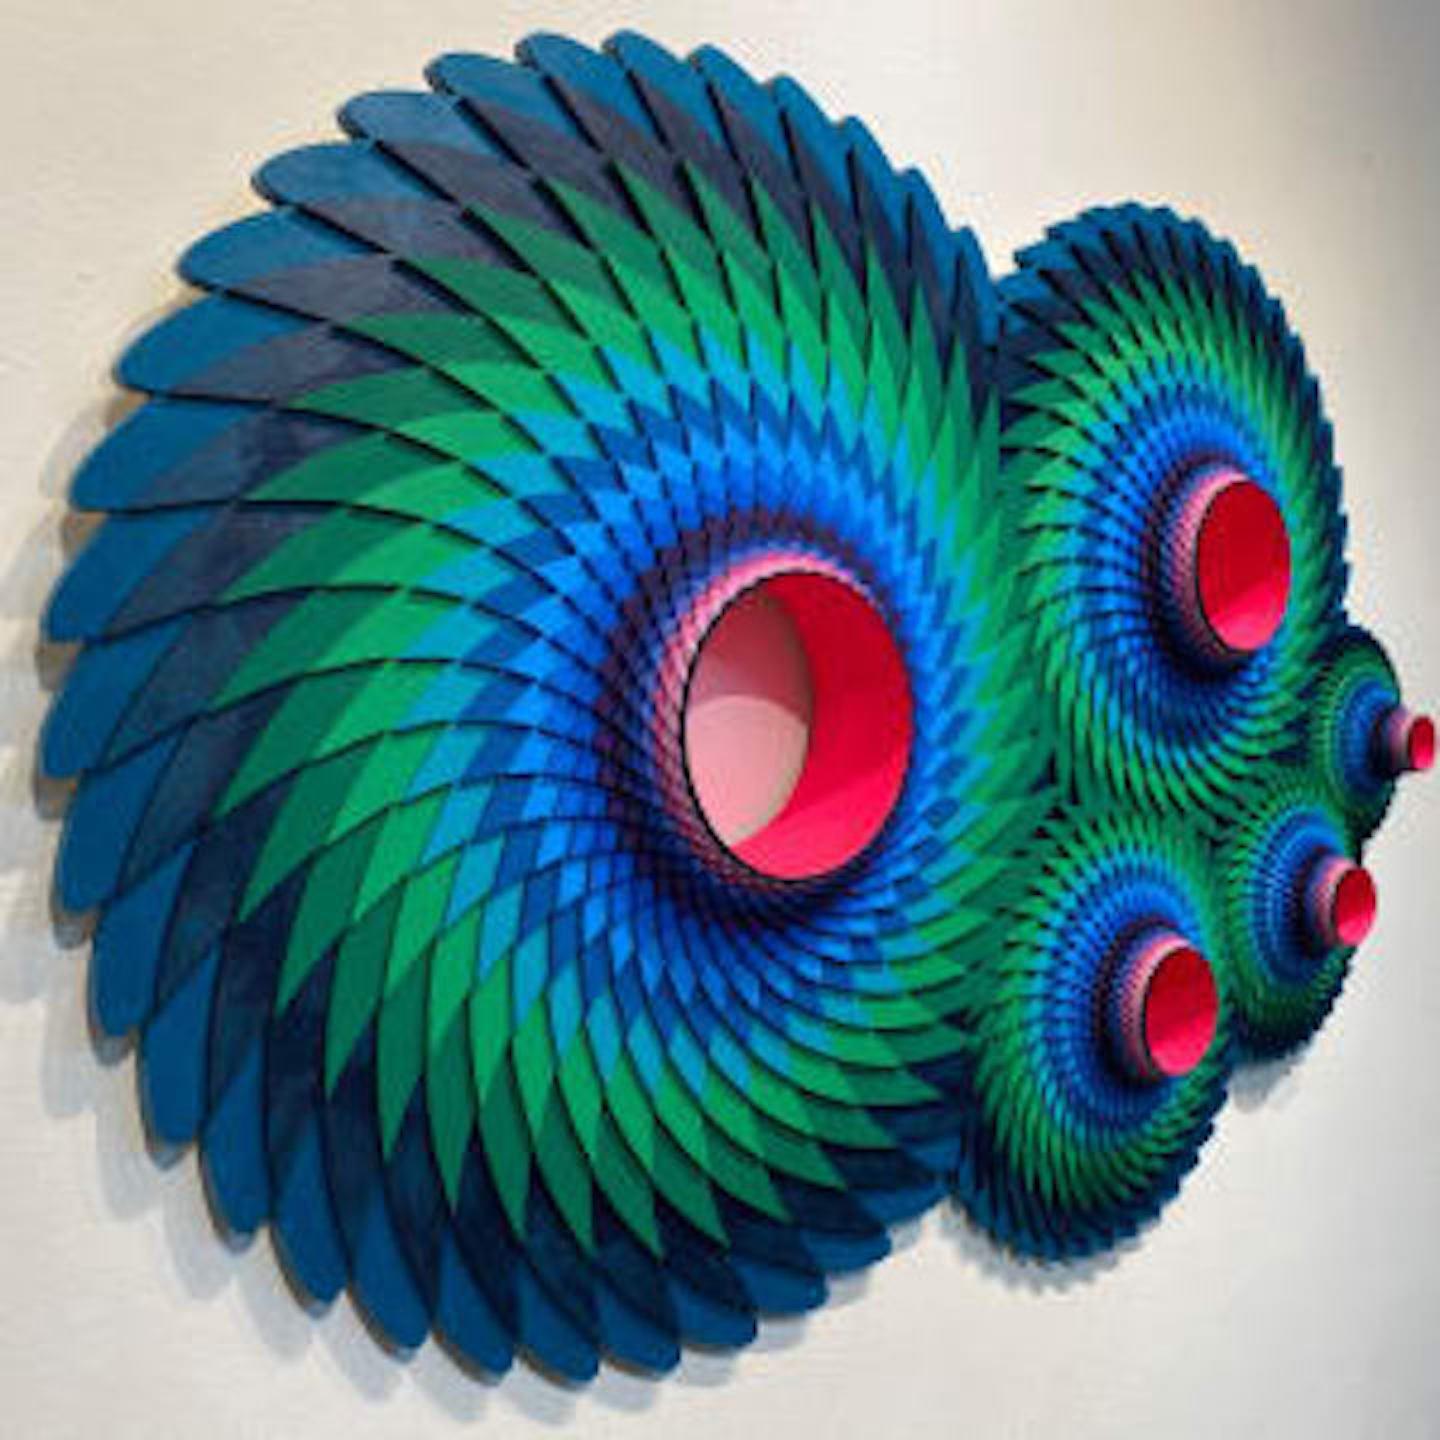 Geometrical gears in circular patterns with blue, green, pink and purple swirls. 
Acrylic on laser cut wood by Christine Romanell.  Original, unique art signed on verso.  Ready to hang.

ARTIST BIO 
Christine Romanell’s colorful wall sculptures and